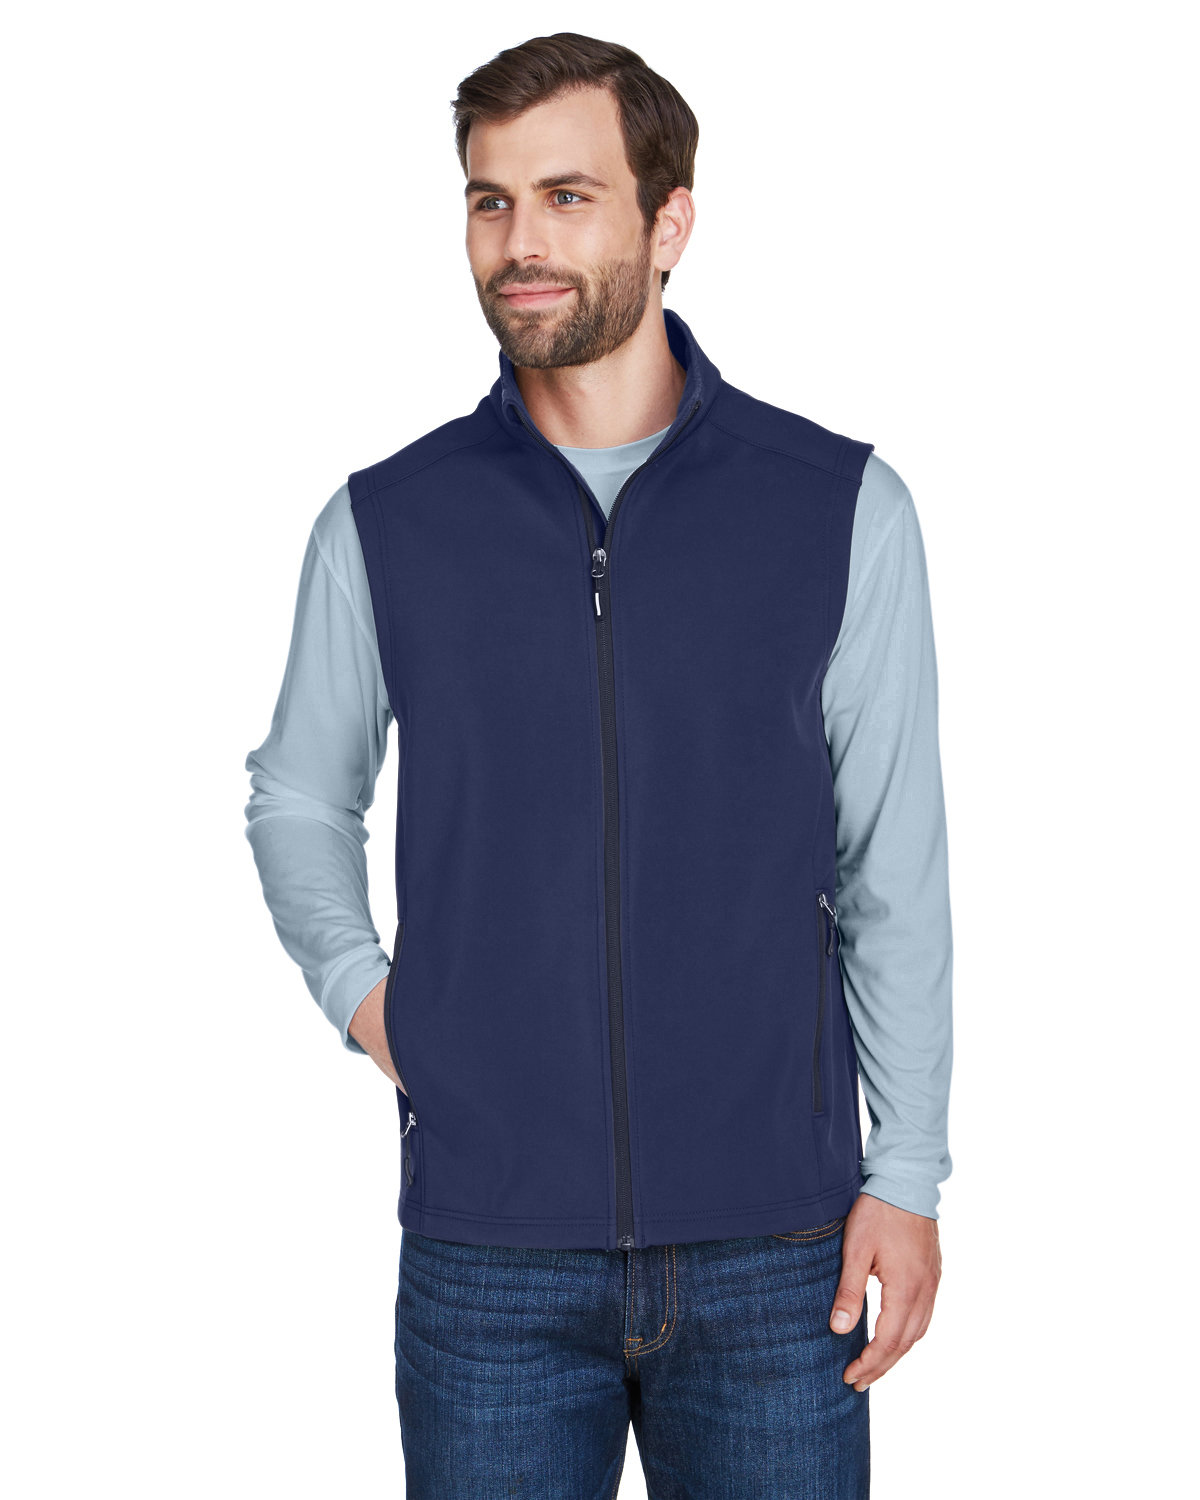 Core365 Men's Cruise Two-Layer Fleece Bonded Soft Shell Vest CLASSIC NAVY 